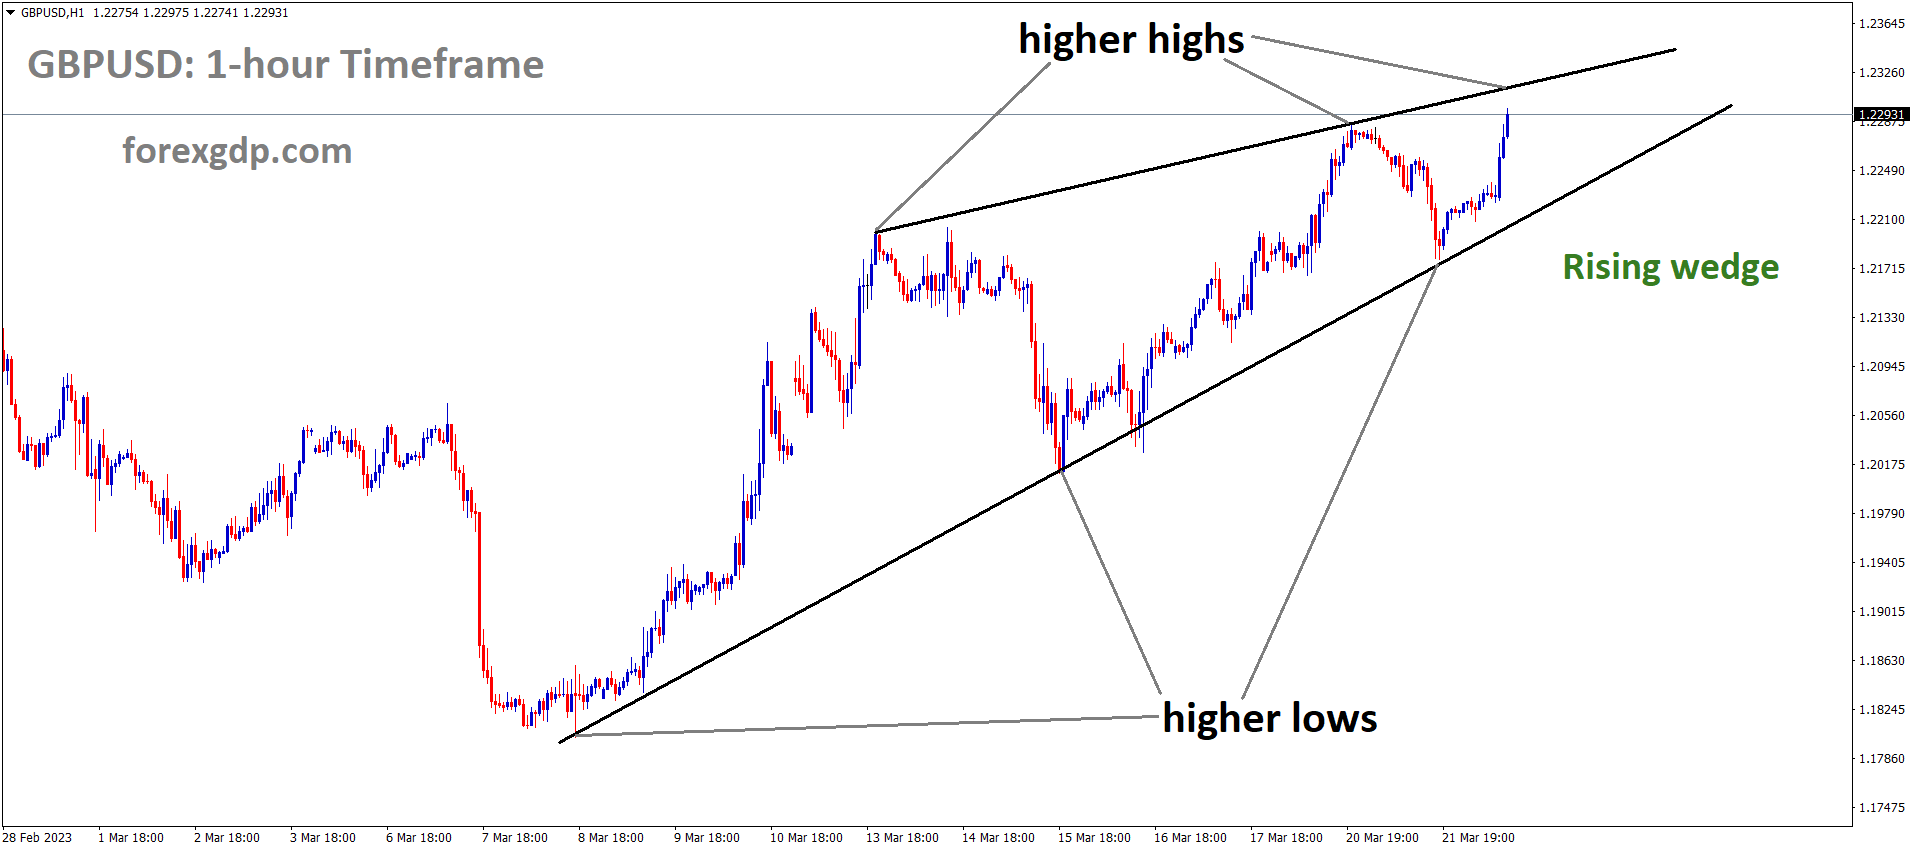 GBPUSD is moving in the Rising Wedge pattern and the market has reached the higher high area of the channel